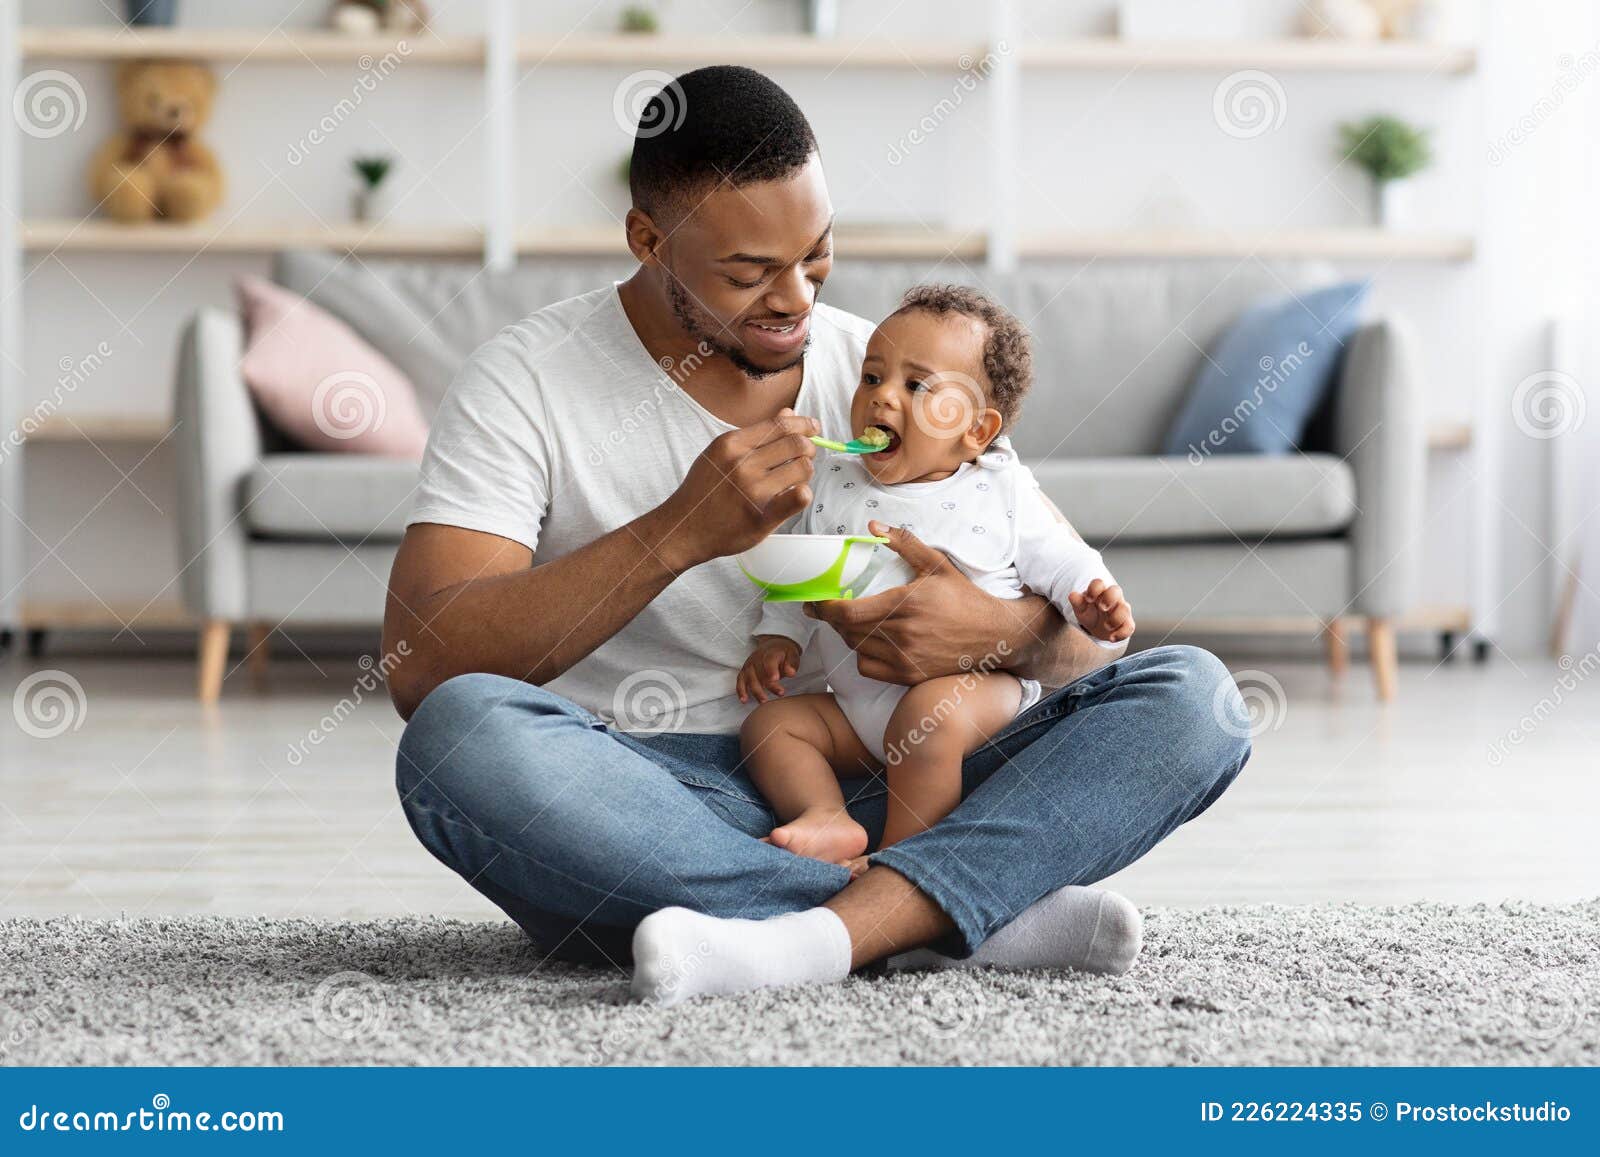 caring black dad feeding his adorable infant baby from spoon at home